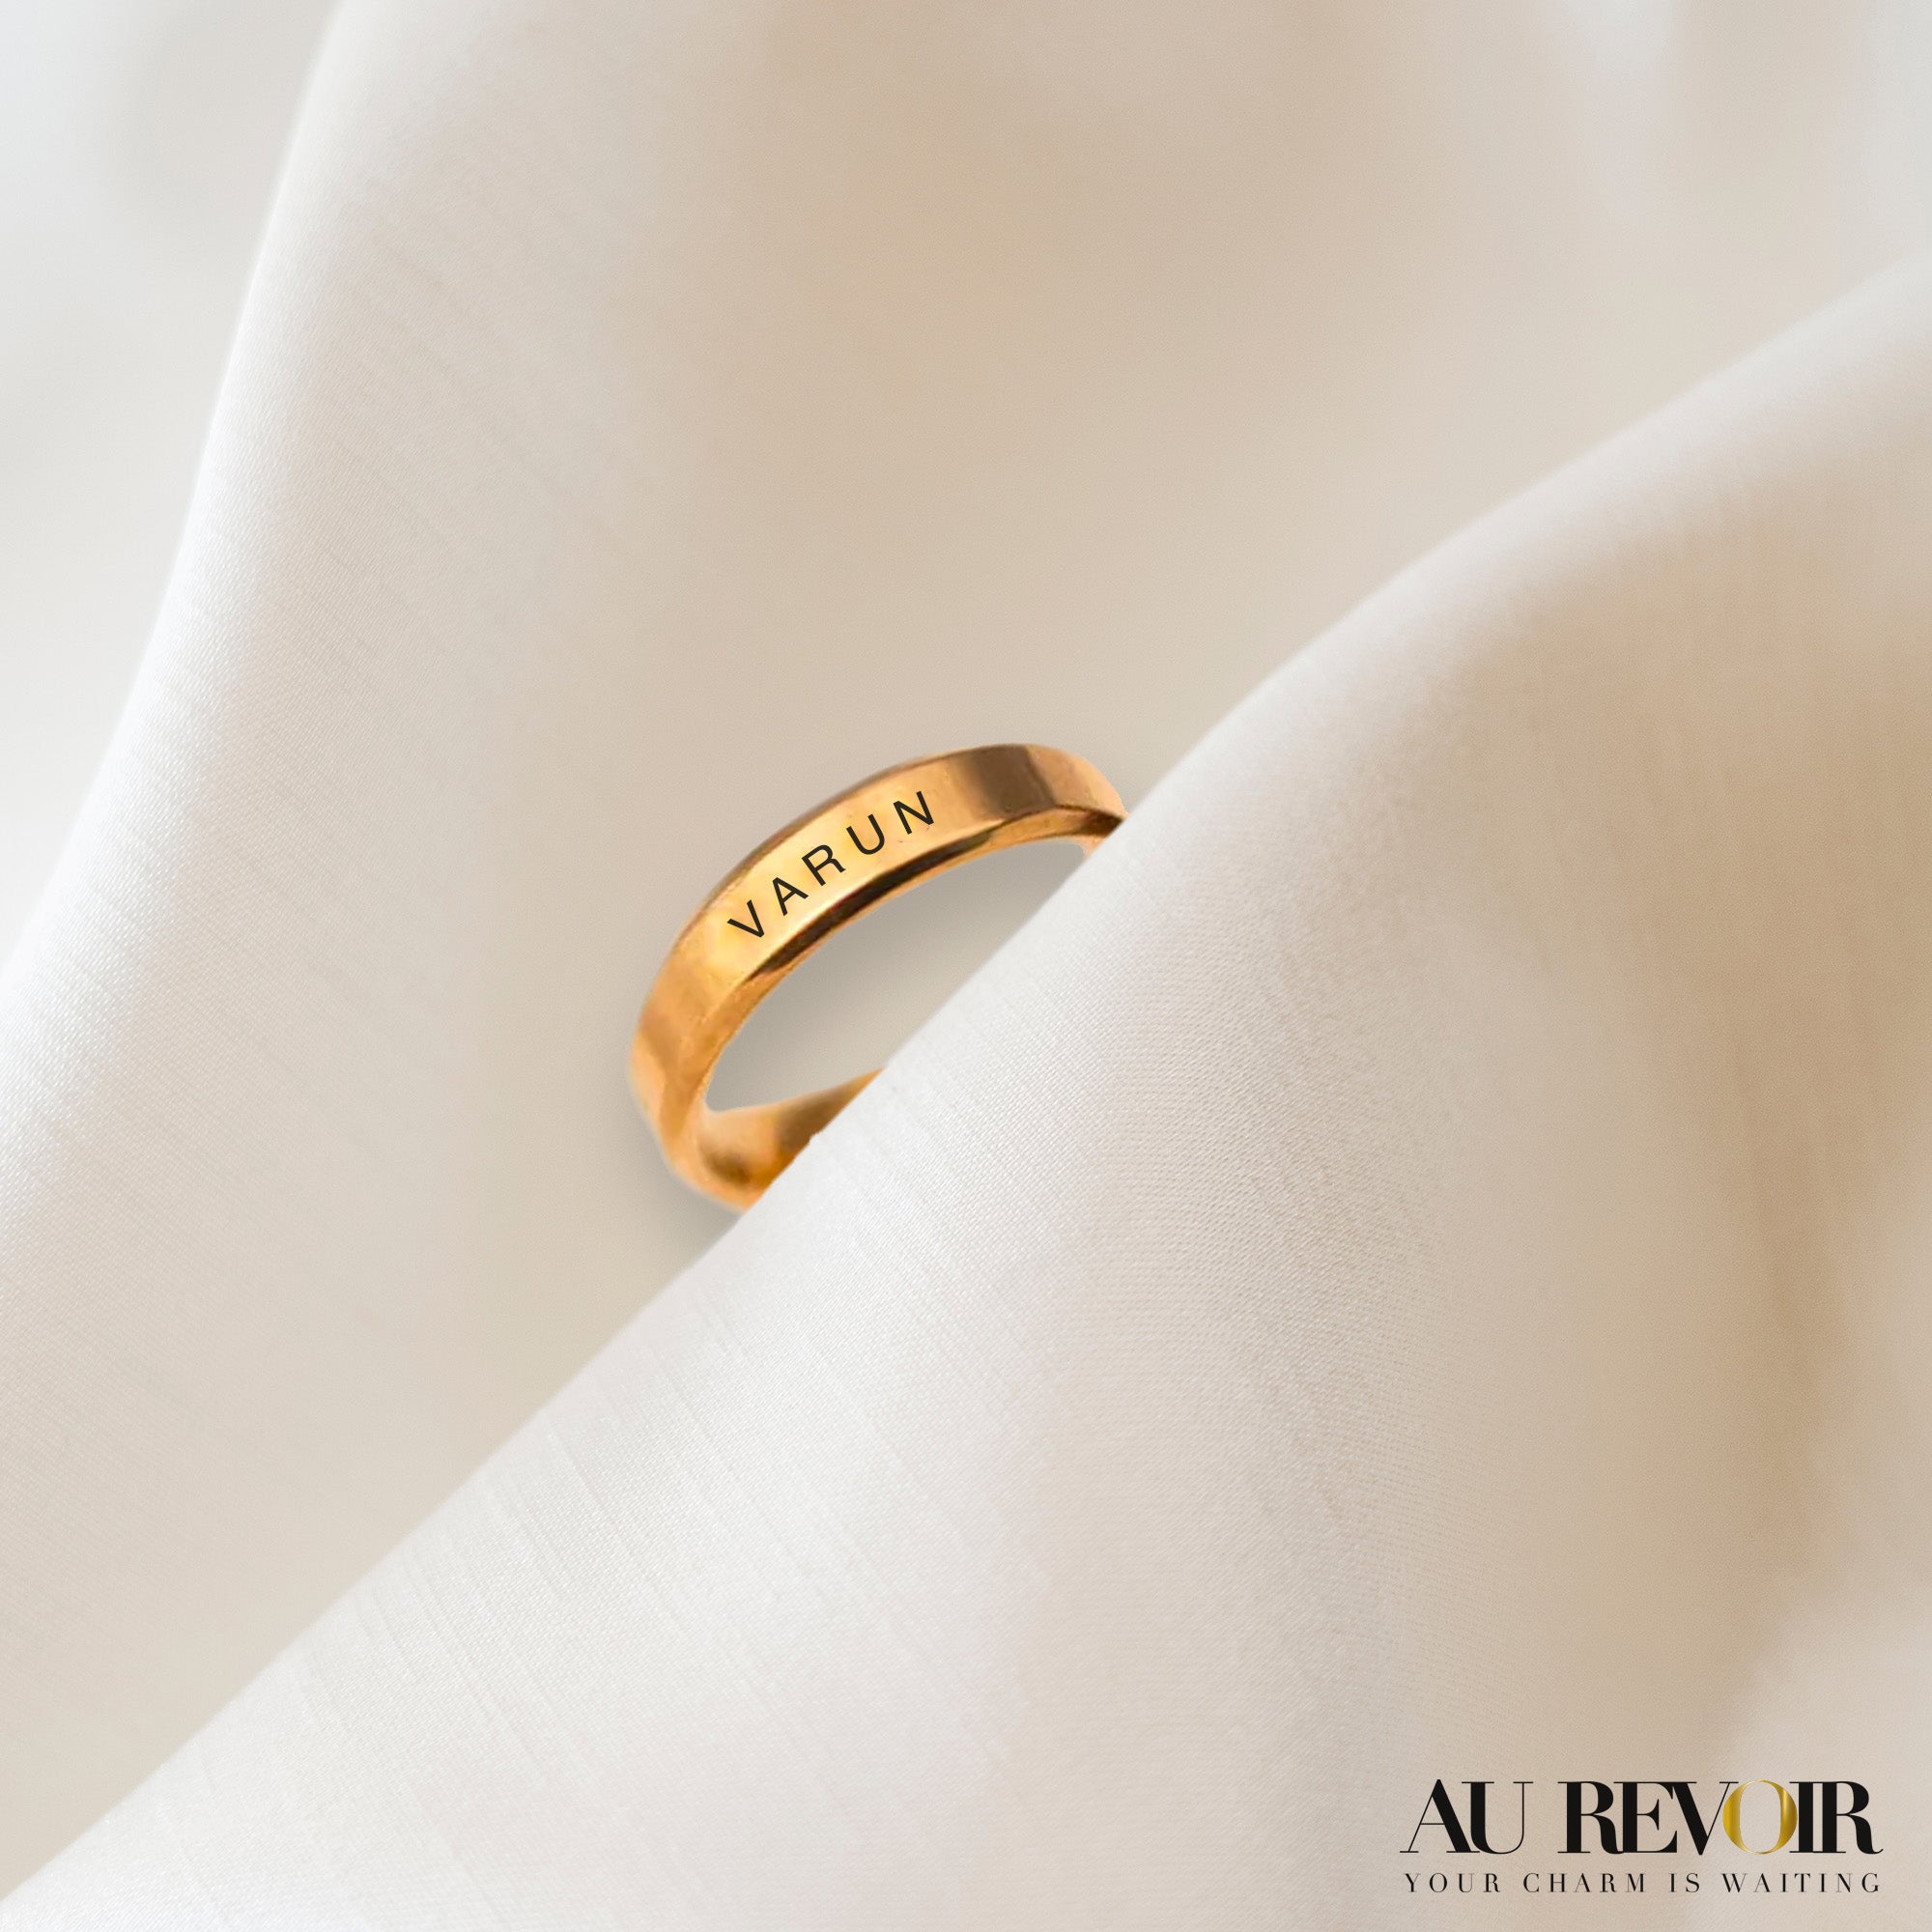 2 Names Ring Gold, Double Name Ring, Personalize Two Names Ring, Custom Name  Ring, Special Double Names Ring, Couple Rings, Multi Name Ring - Etsy | Gold  rings fashion, Gold ring designs,